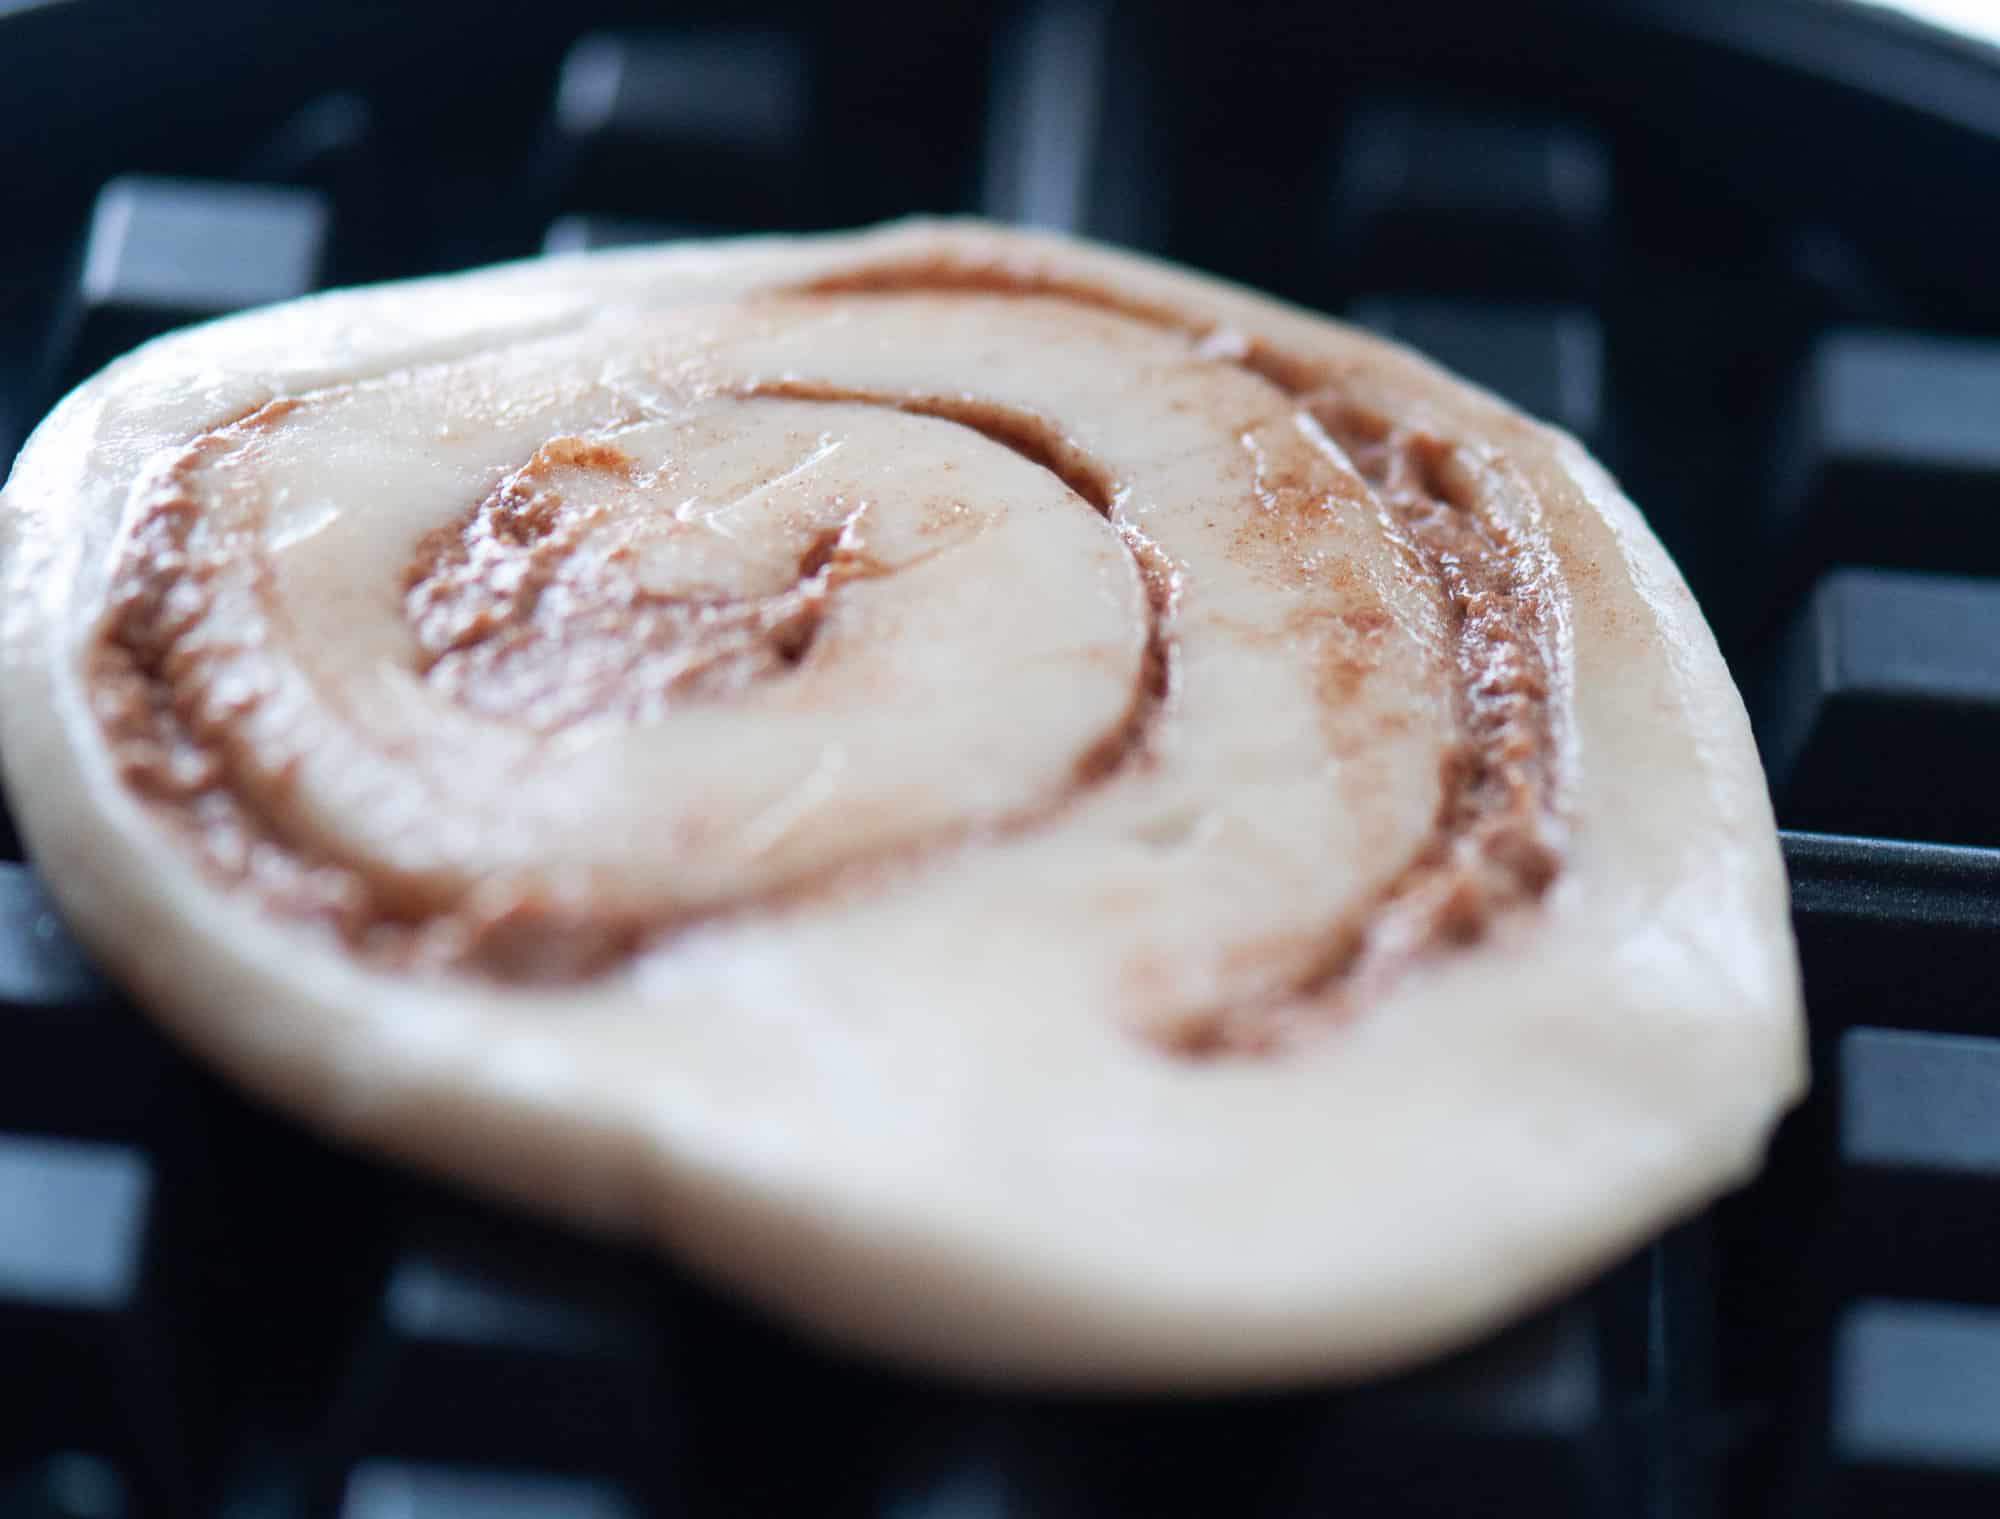 A cinnamon roll in the waffle maker.